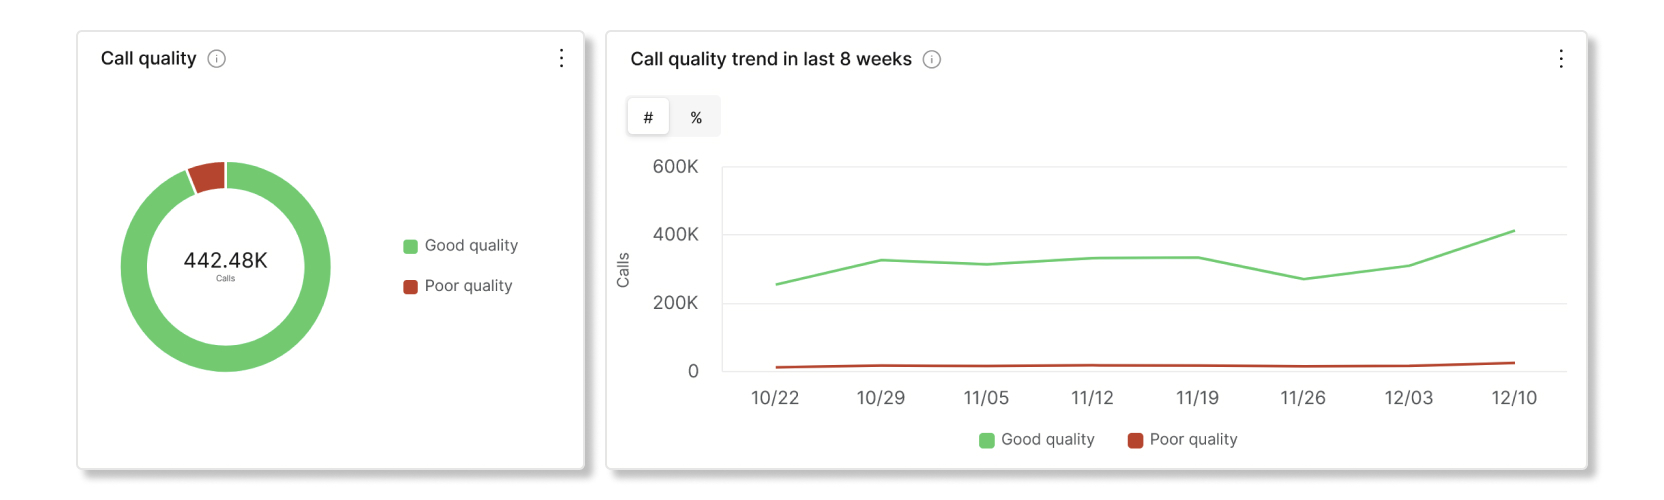 Call quality and trend chart in Partner Hub calling engagement analytics